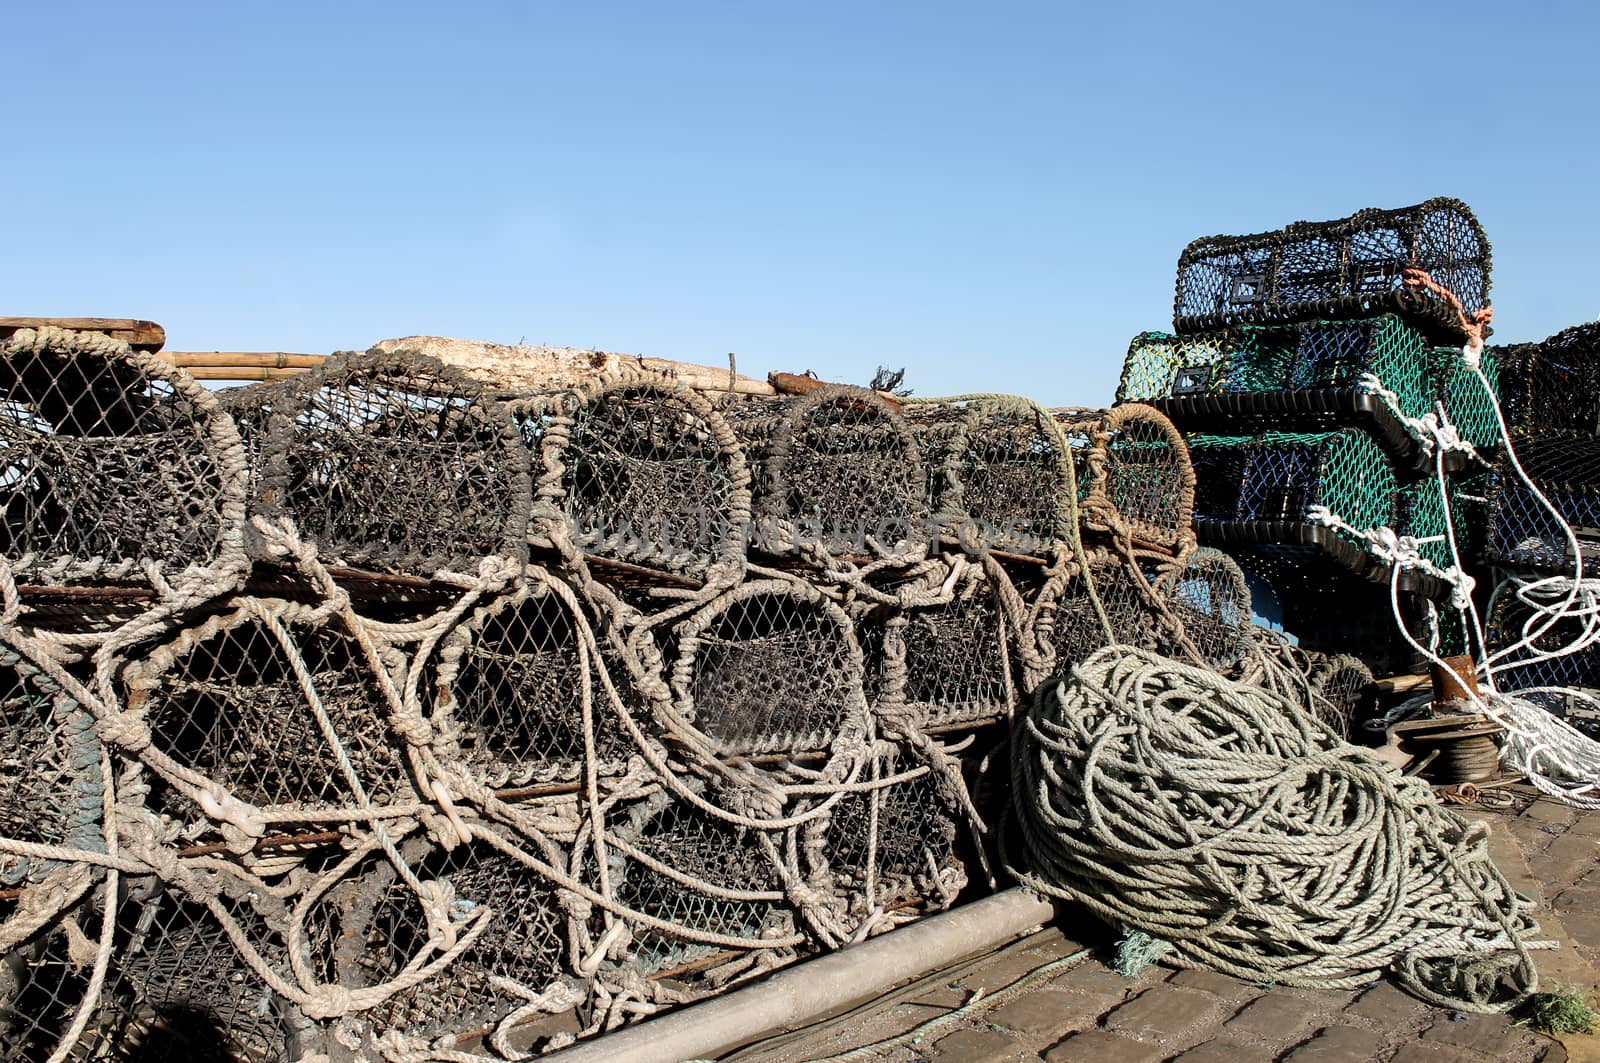 Lobster pots and fishing nets on a harbor quayside.